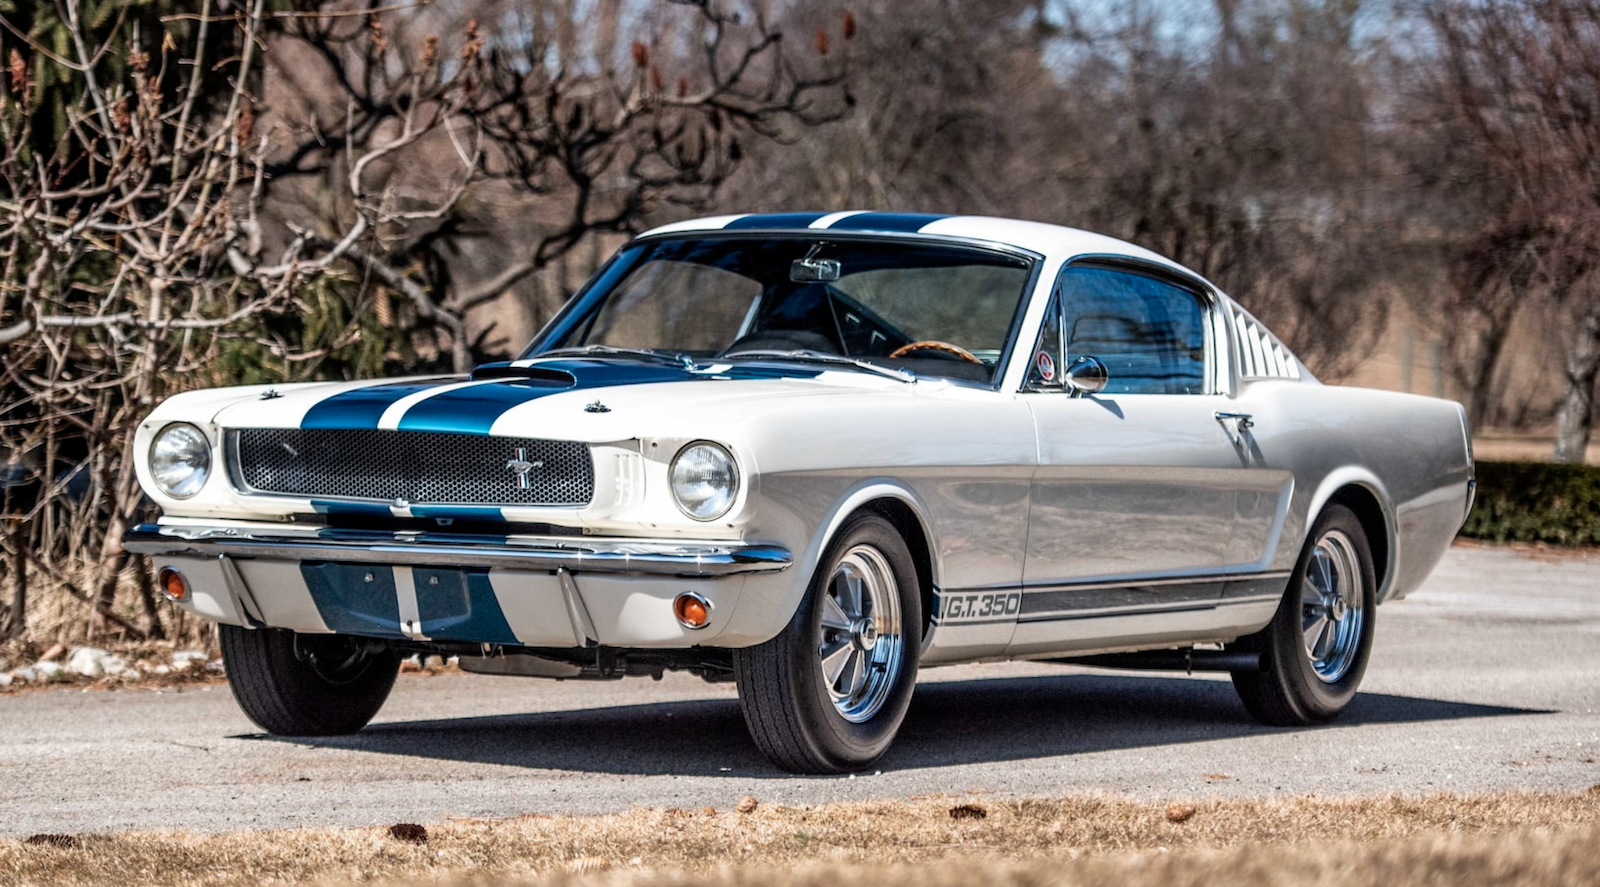 Car Of The Day - 1965 Shelby GT350 Mustang